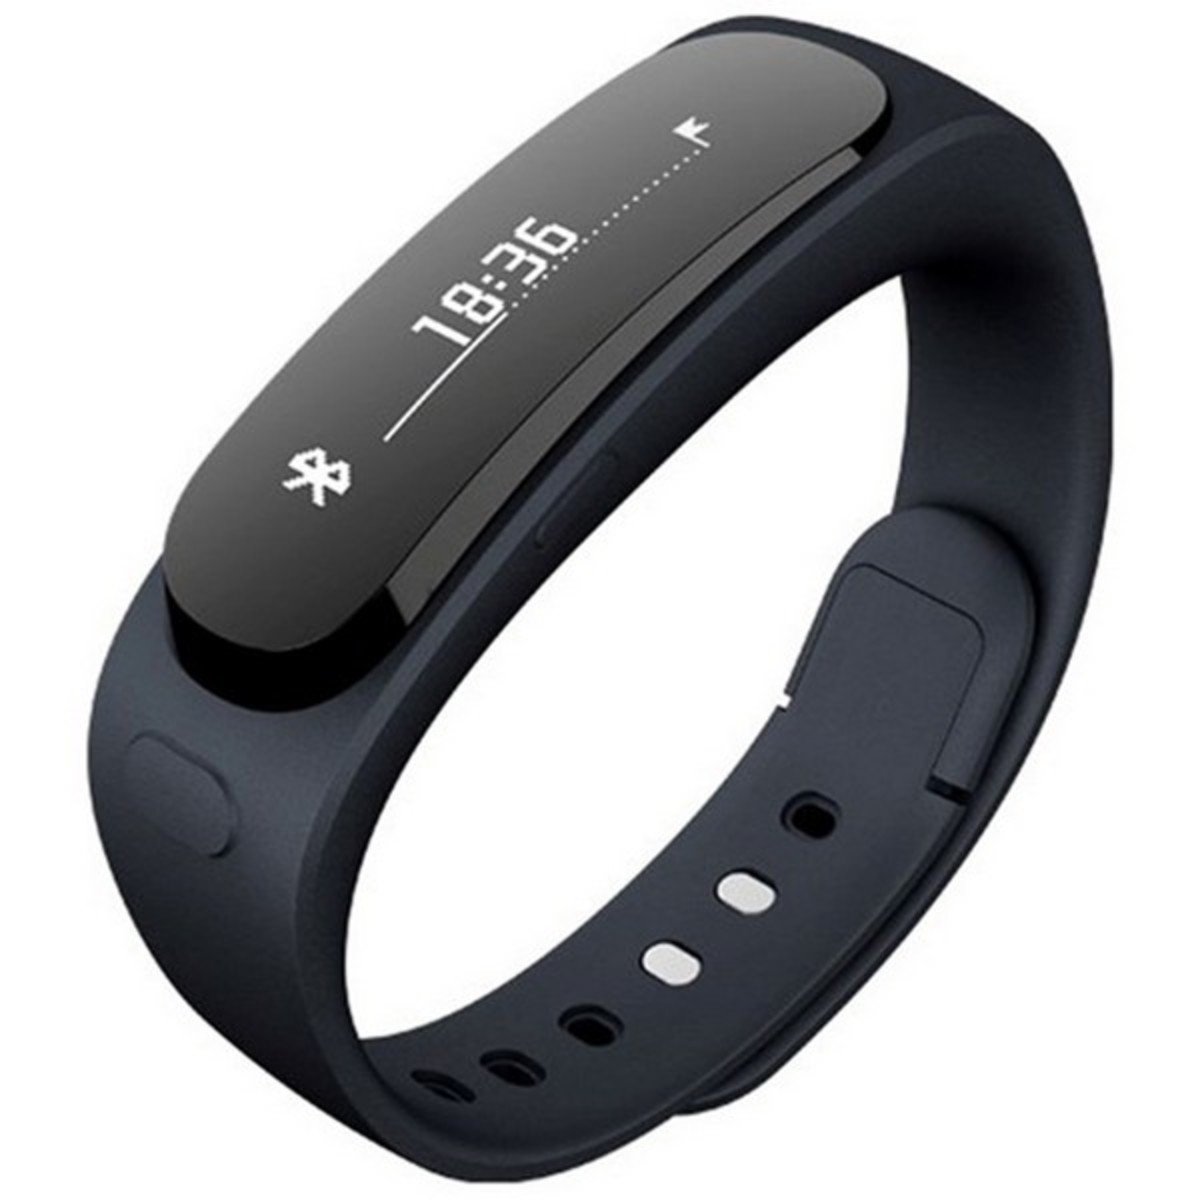 Huawei TalkBand B1 1.4 inch Smart Band Black Online at Best Price ...